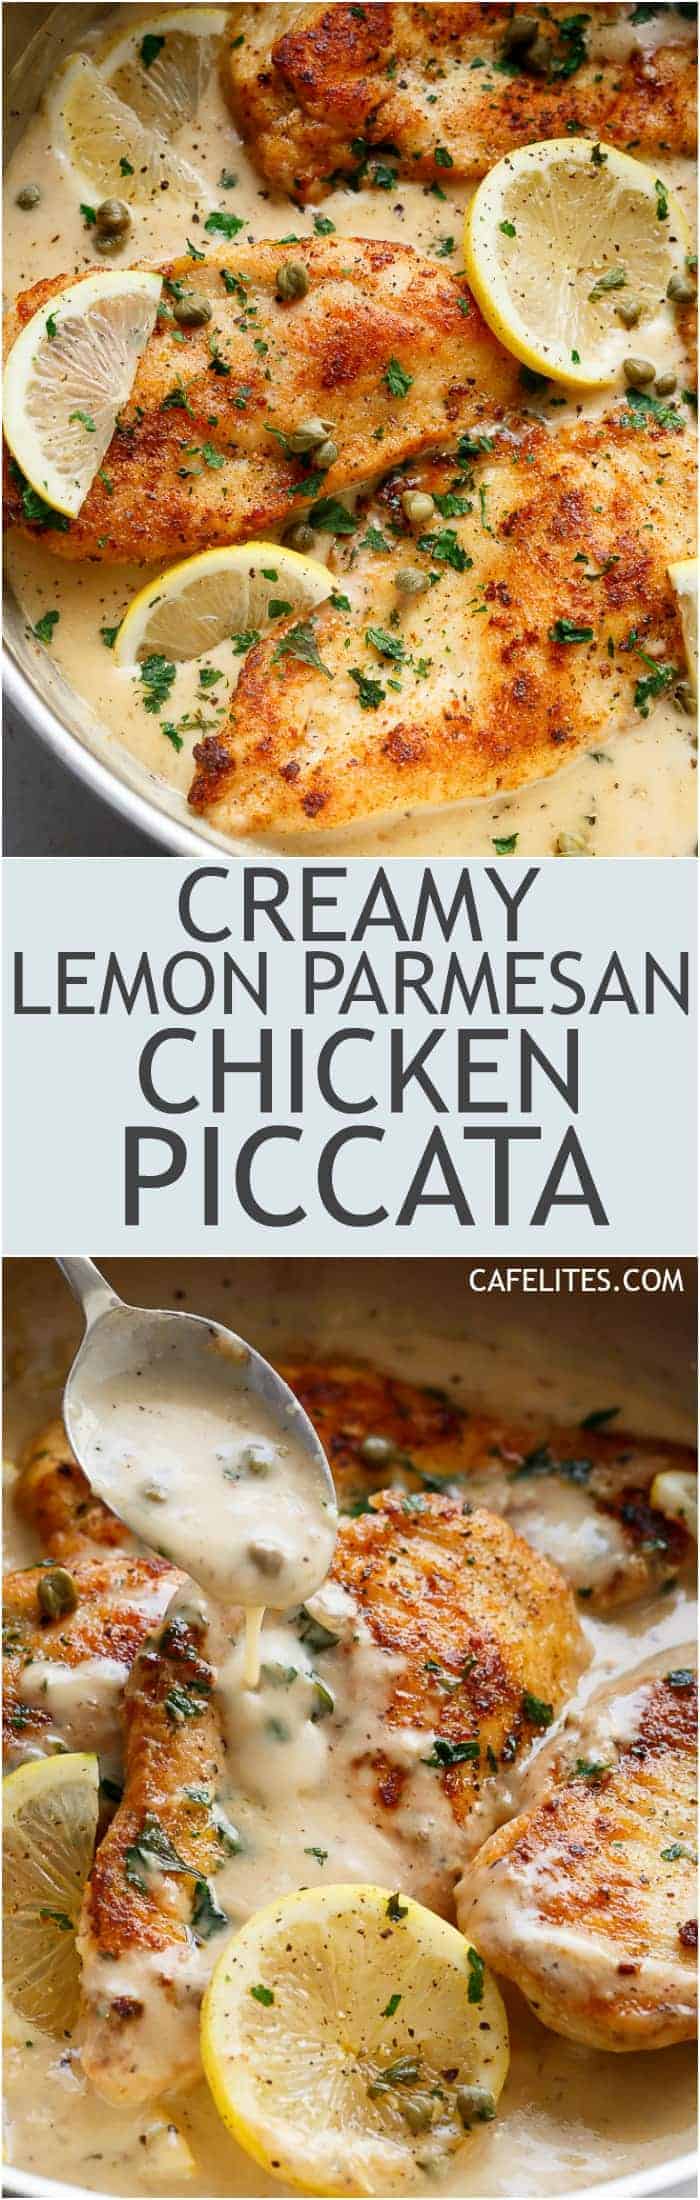 The ultimate in gourmet comfort food with parmesan cheese, garlic and a creamy lemon sauce, this Creamy Lemon Parmesan Chicken Piccata is out of this world. With NO heavy cream! | https://cafedelites.com